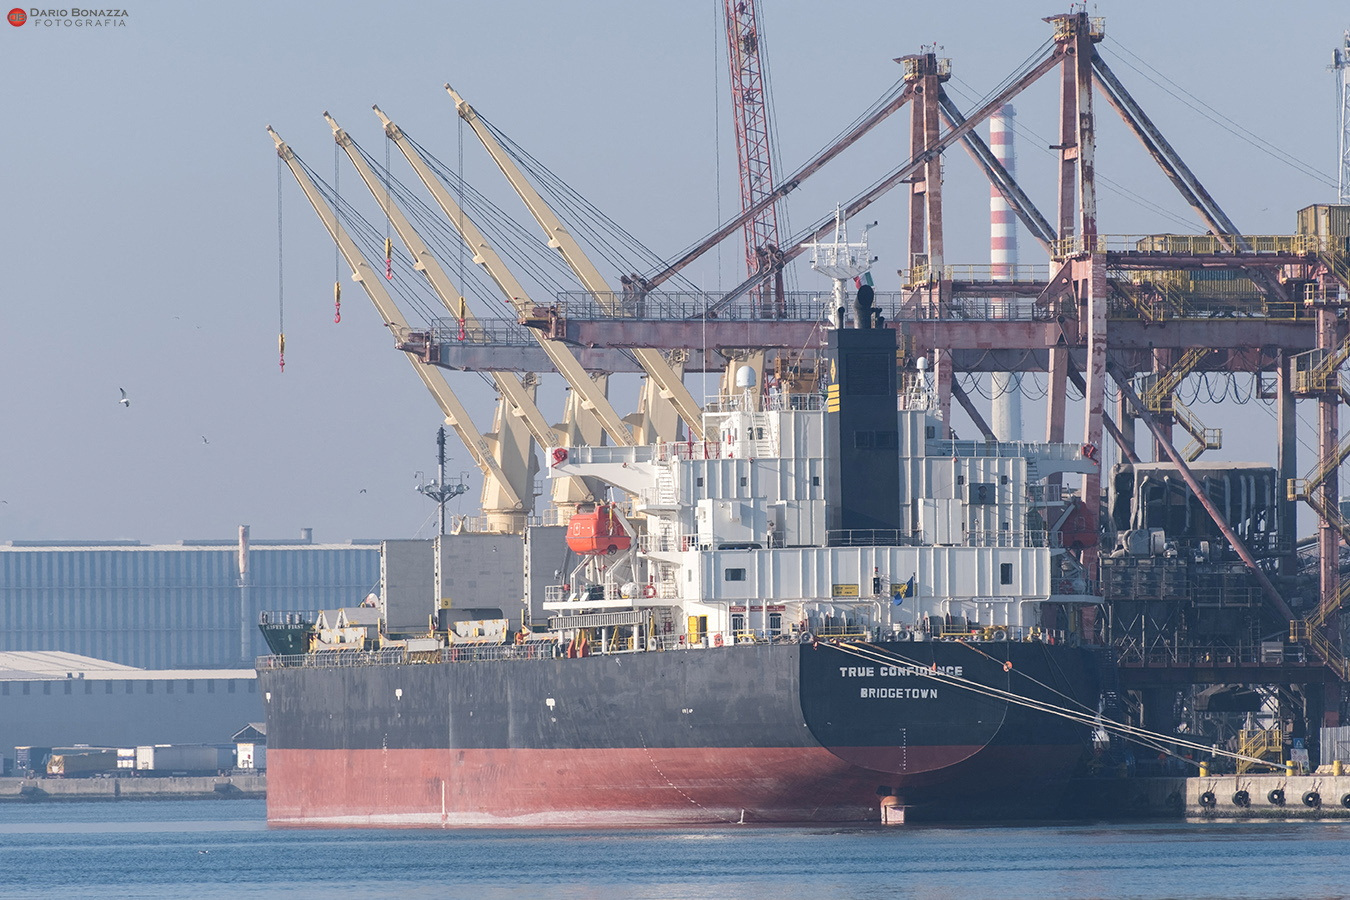 This 2022 photo shows the bulk carrier vessel True Confidence in Ravenna, Italy.